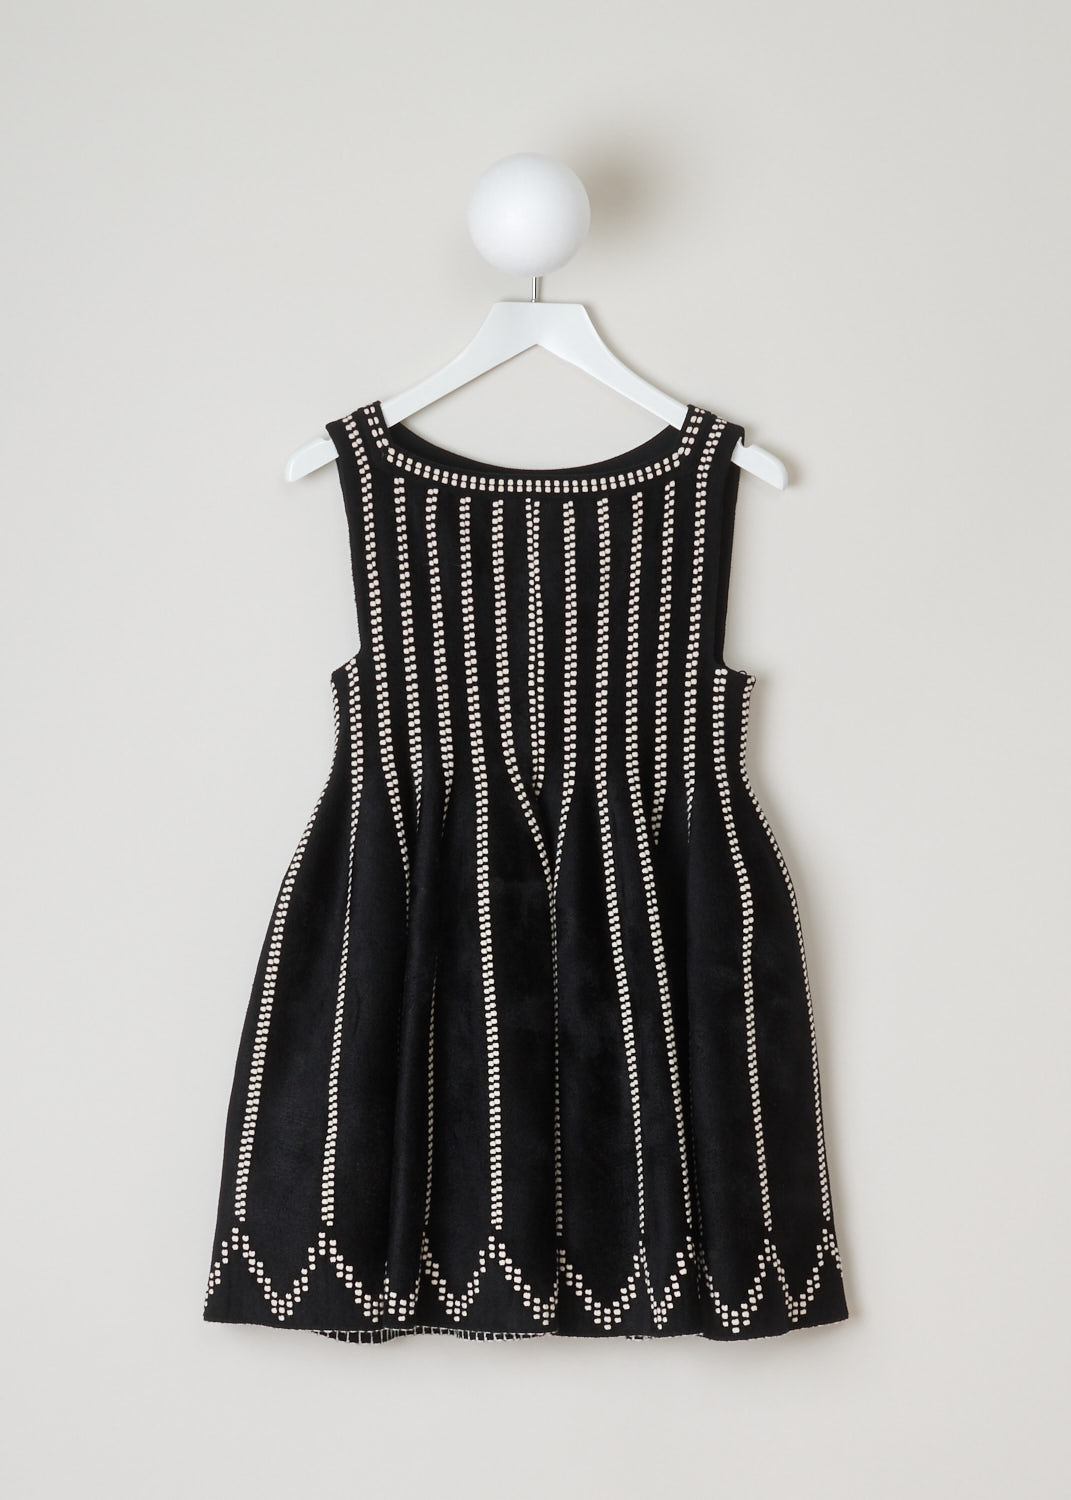 AlaÃ¯a, Black dotted mini-dress, 3H9R367CM071_robe_sm_glacier_velours_C962_noir_ivoire, black white, front, Ivory dots cover this thigh-high mini-dress. Featuring no sleeves and a boat neckline. Made with wool the fabric has a roughened wool feel, so it will keep you warm. The skirt has a zigzagging line of dots above the hem.